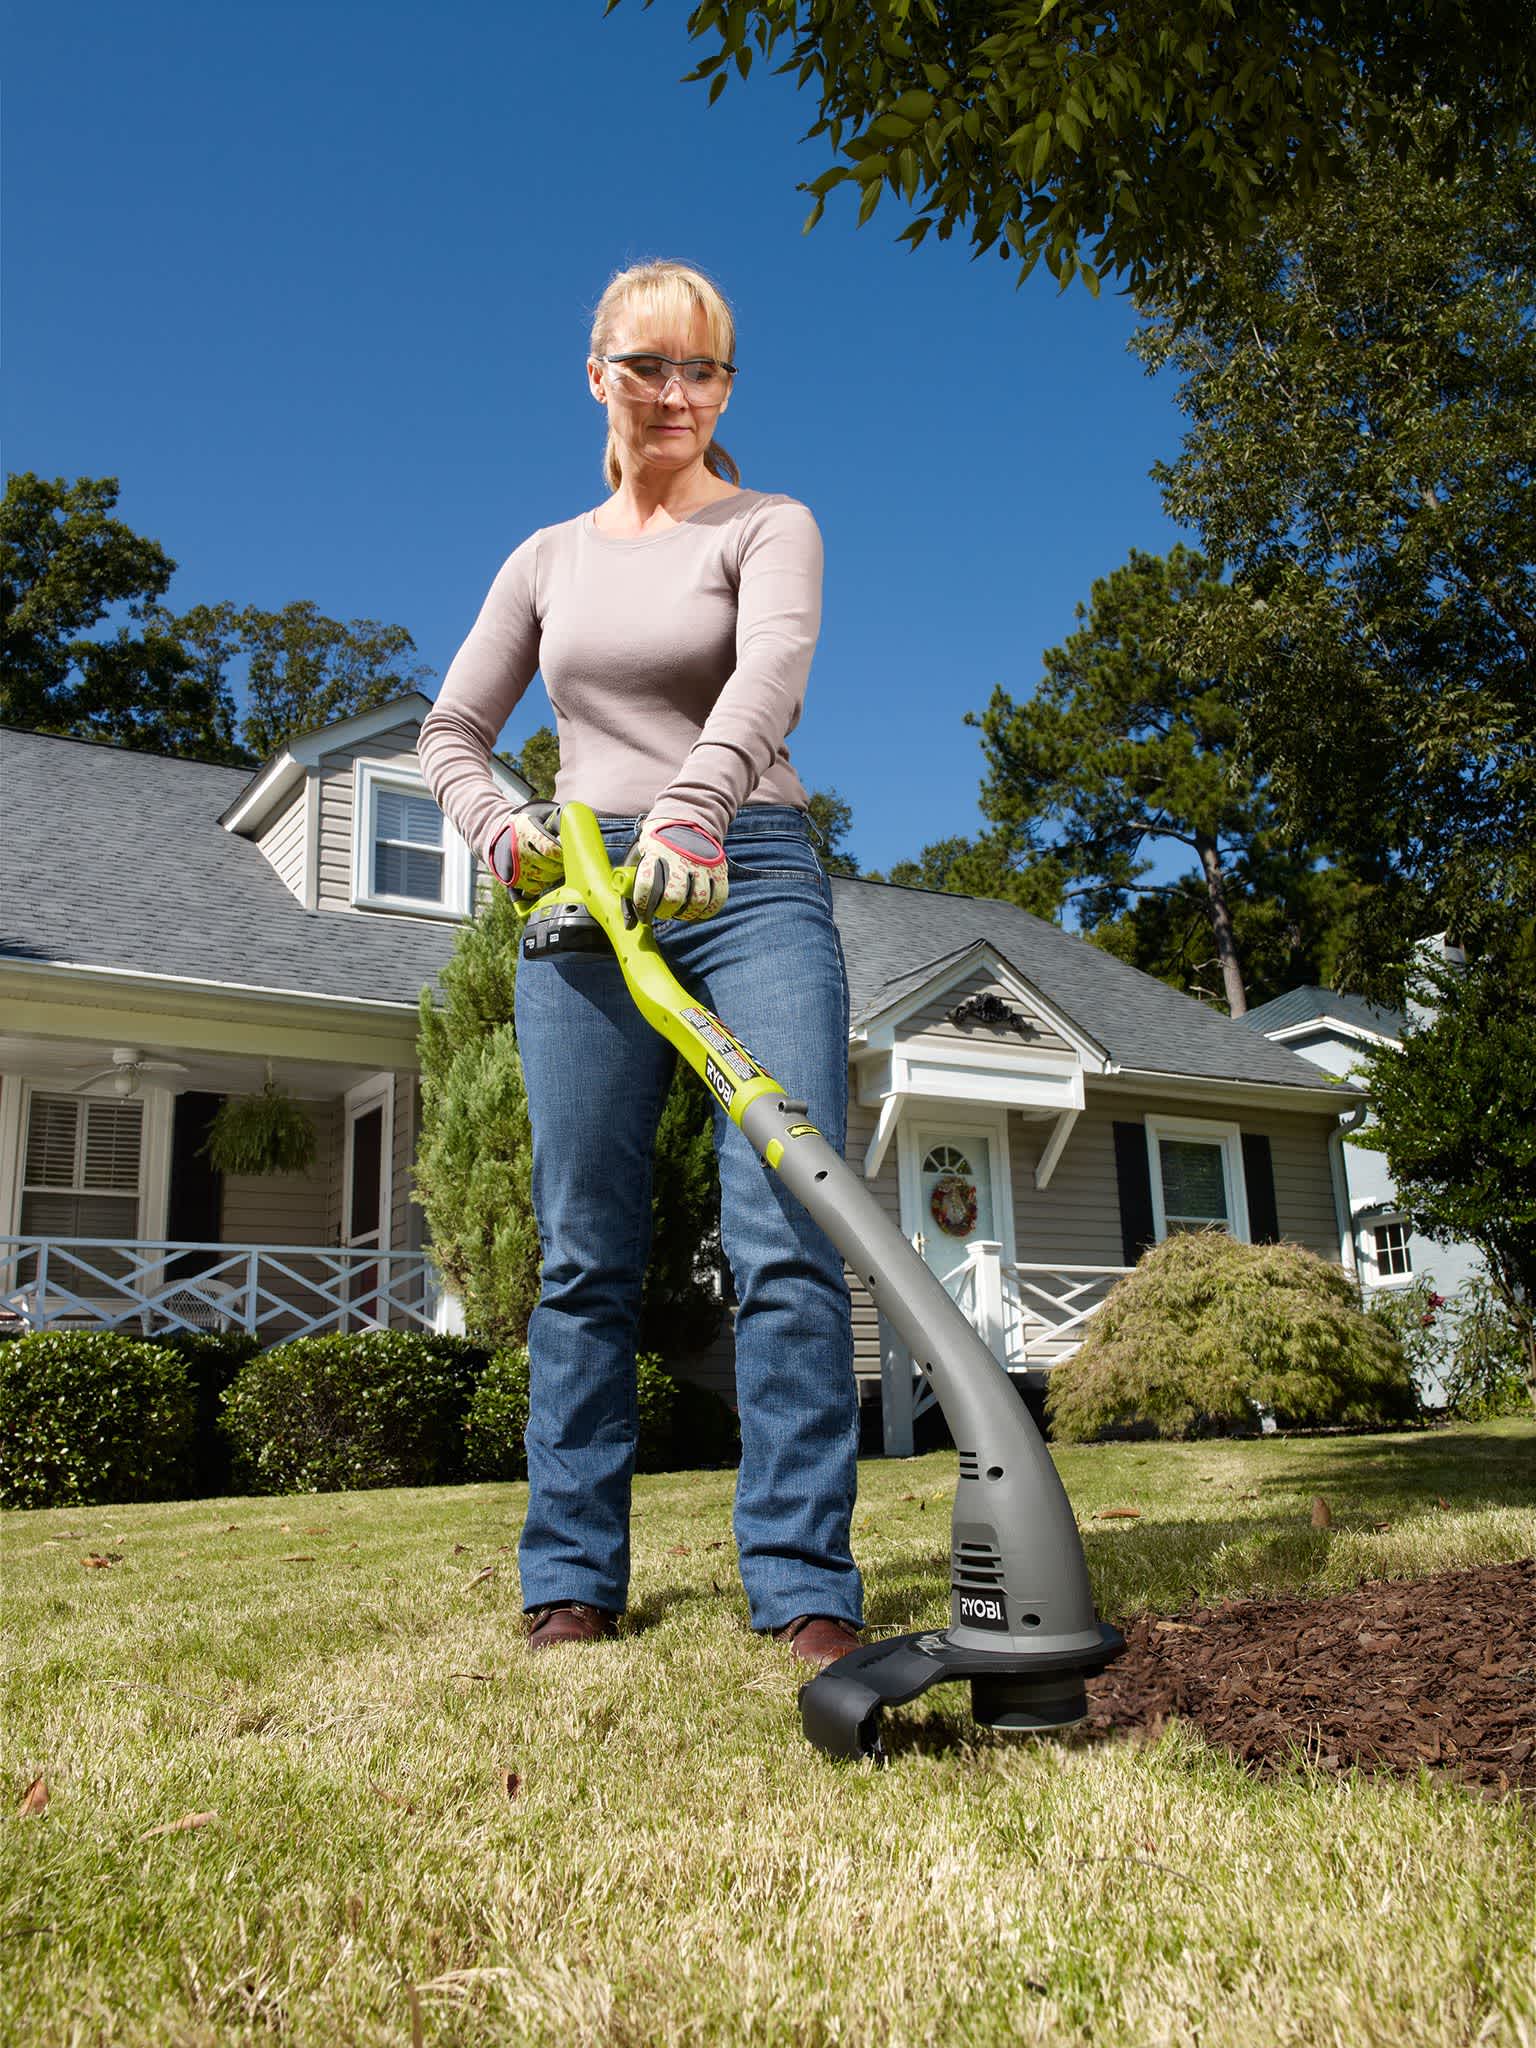 Product Features Image for 18V ONE+ 10" CORDLESS STRING TRIMMER/EDGER (TOOL ONLY).